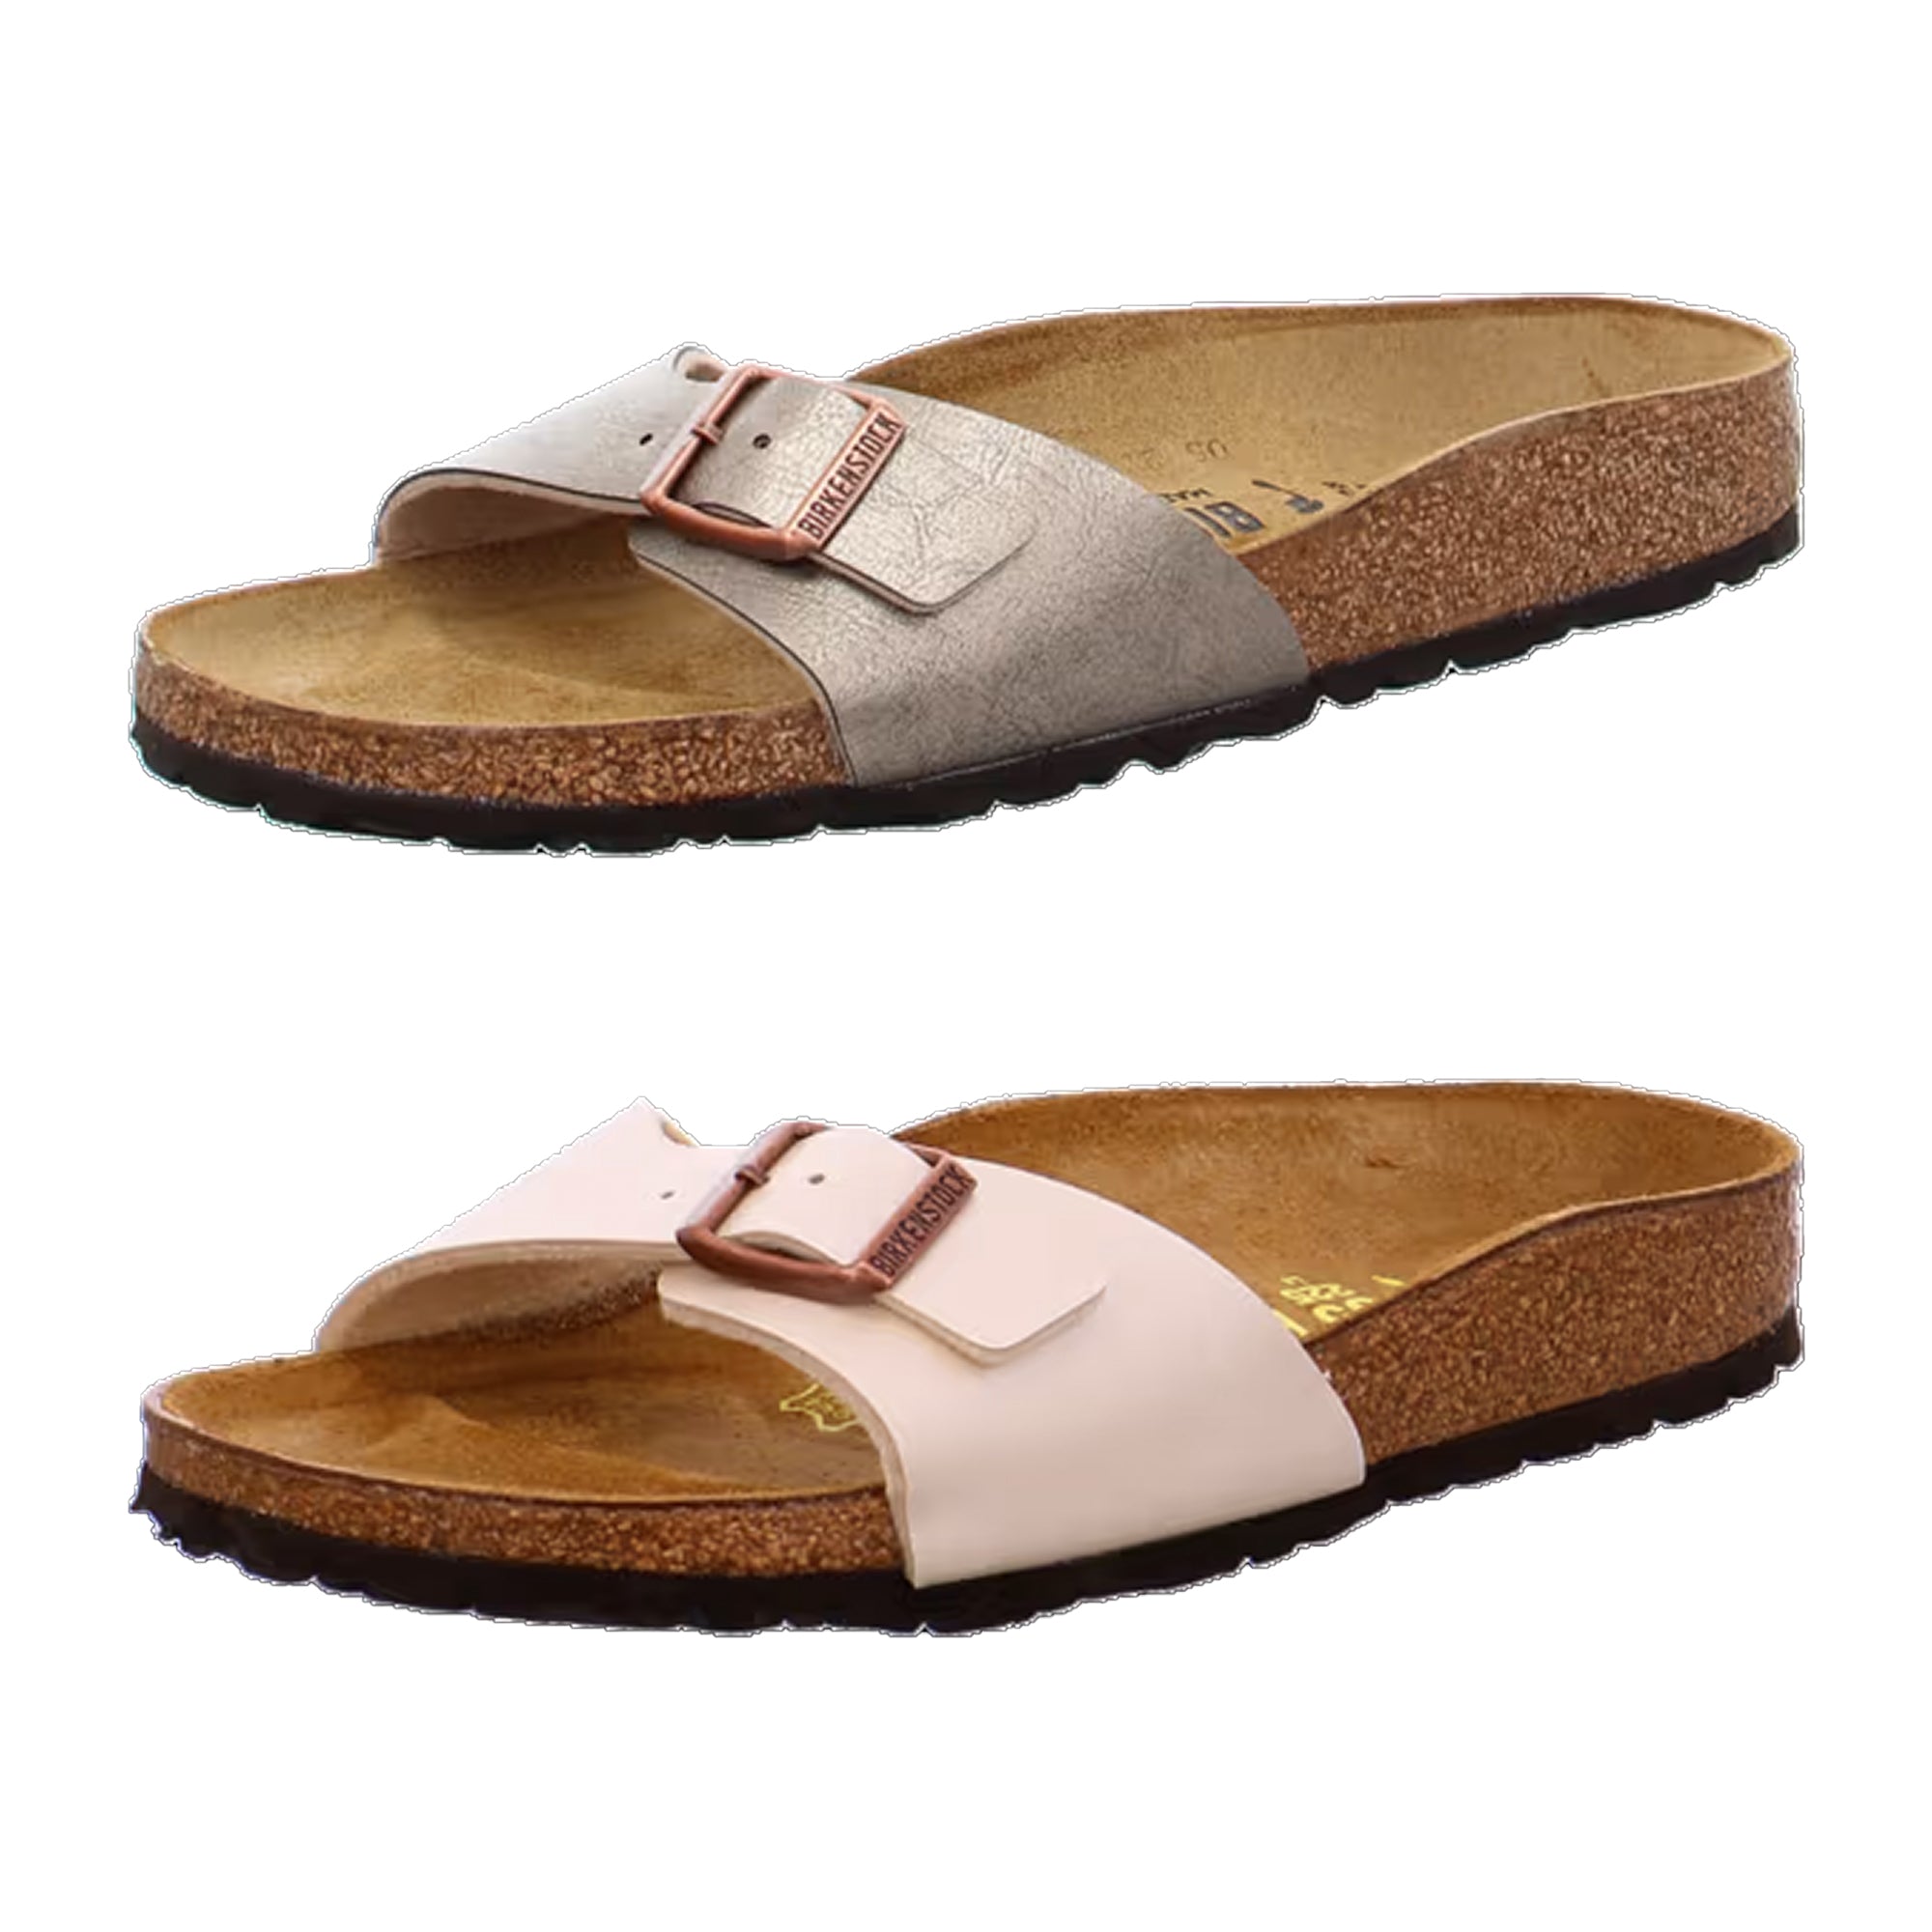 Birkenstock Madrid BF Mules Graceful Taupe Pearl White Sandals Slides Clogs